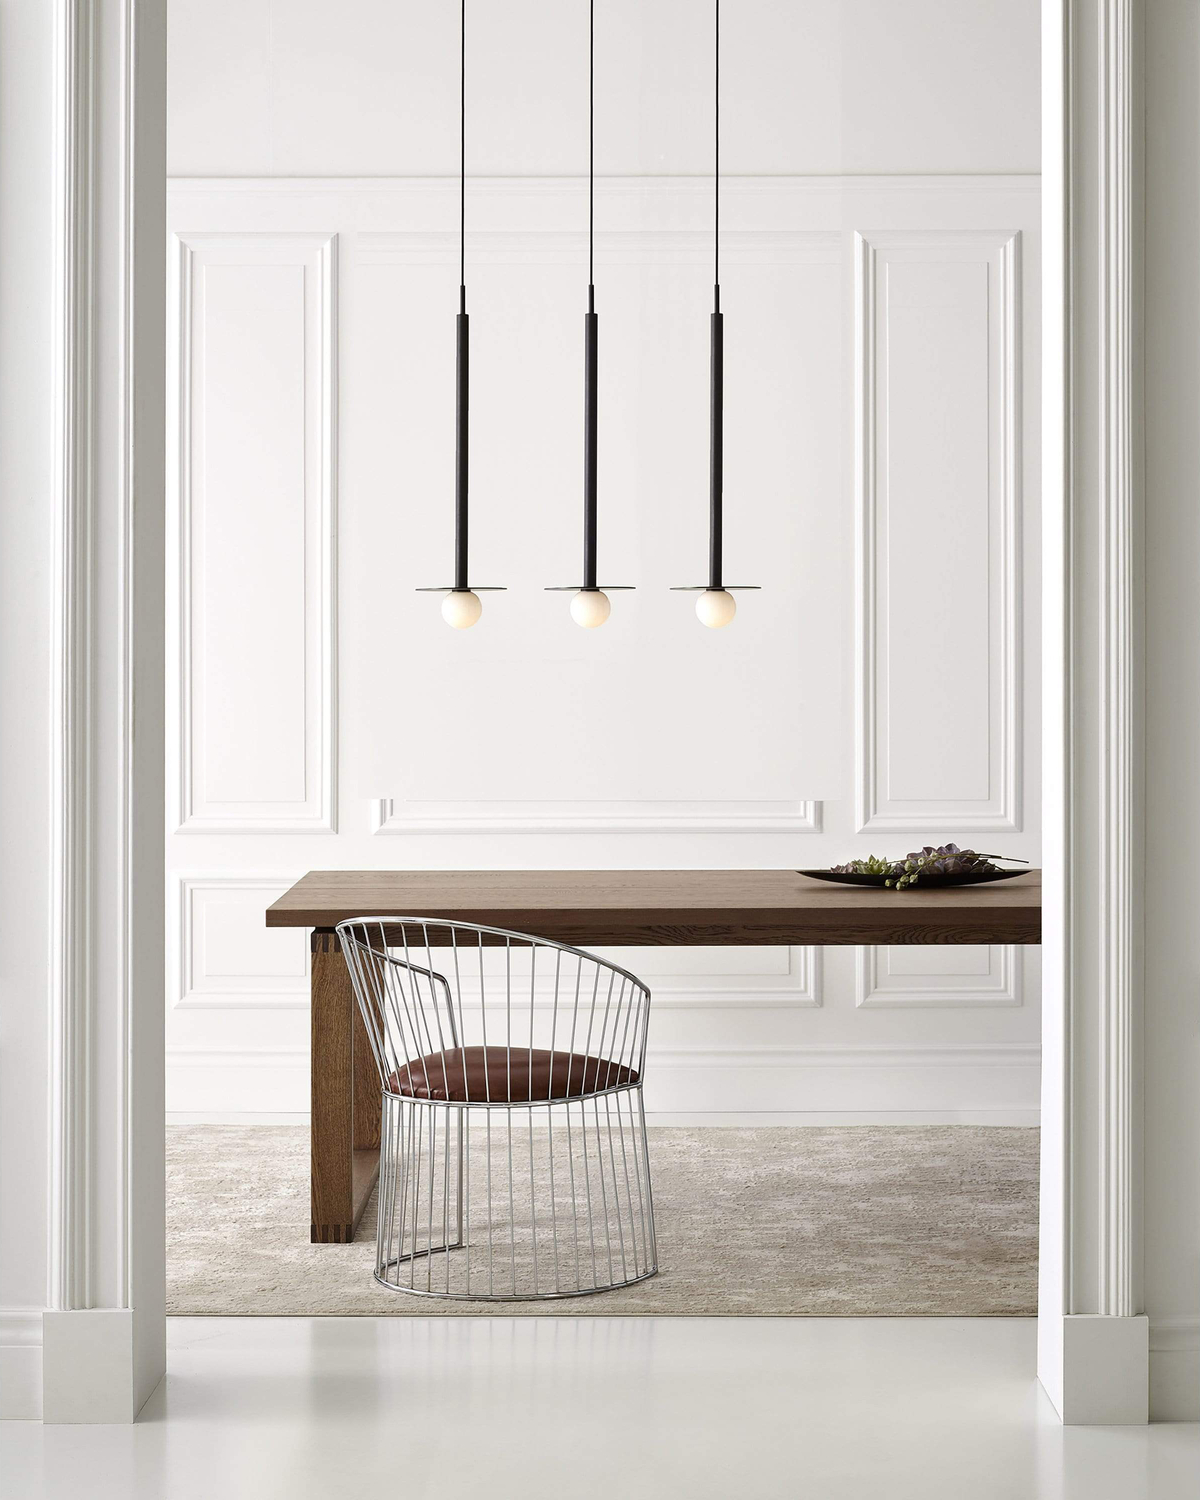 Three black pendant lights above wooden dining table in white dining room with chair